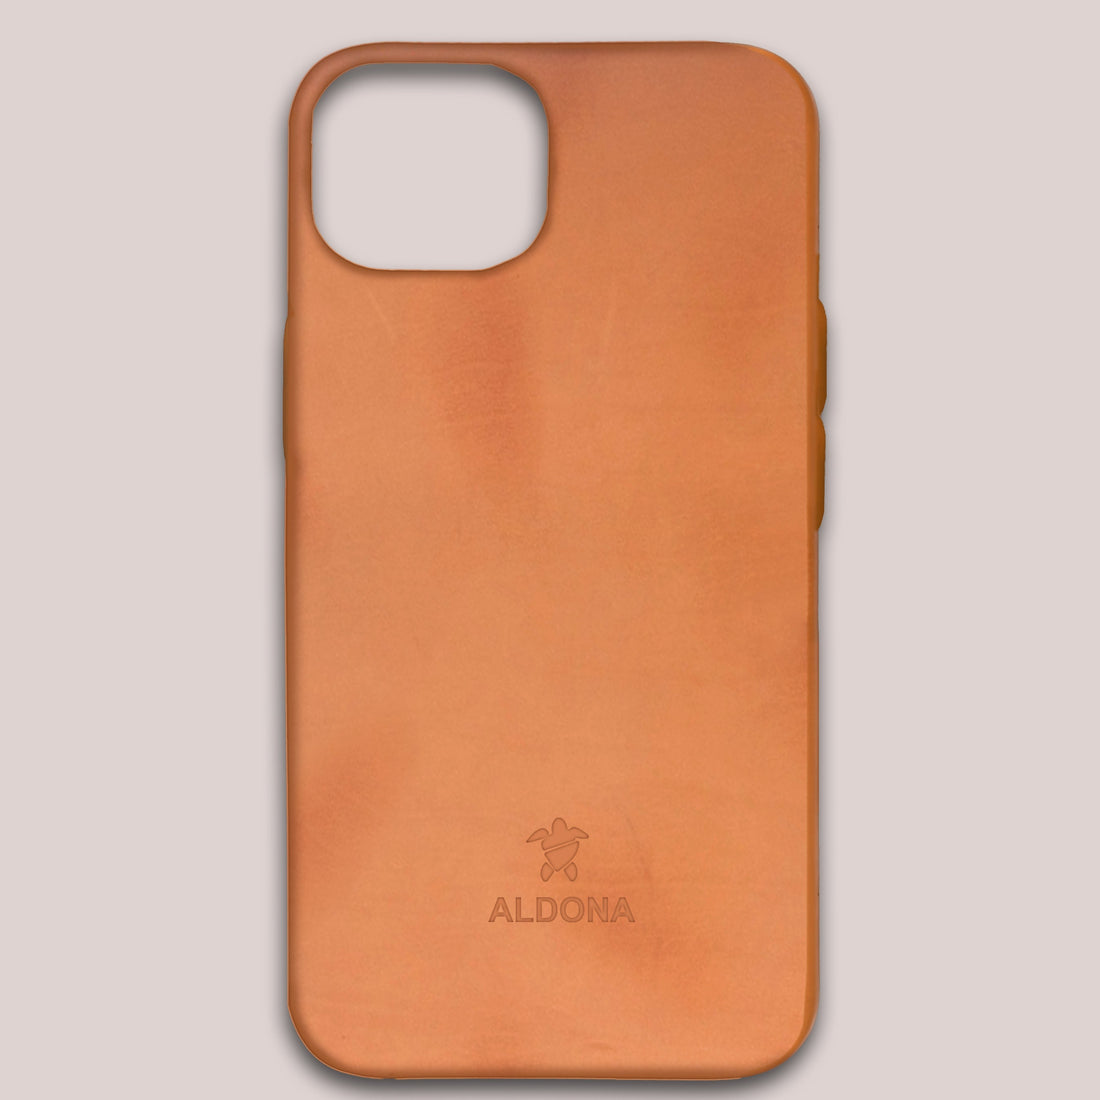 Kalon Case for iPhone 13 with MagSafe Compatibility - Cognac